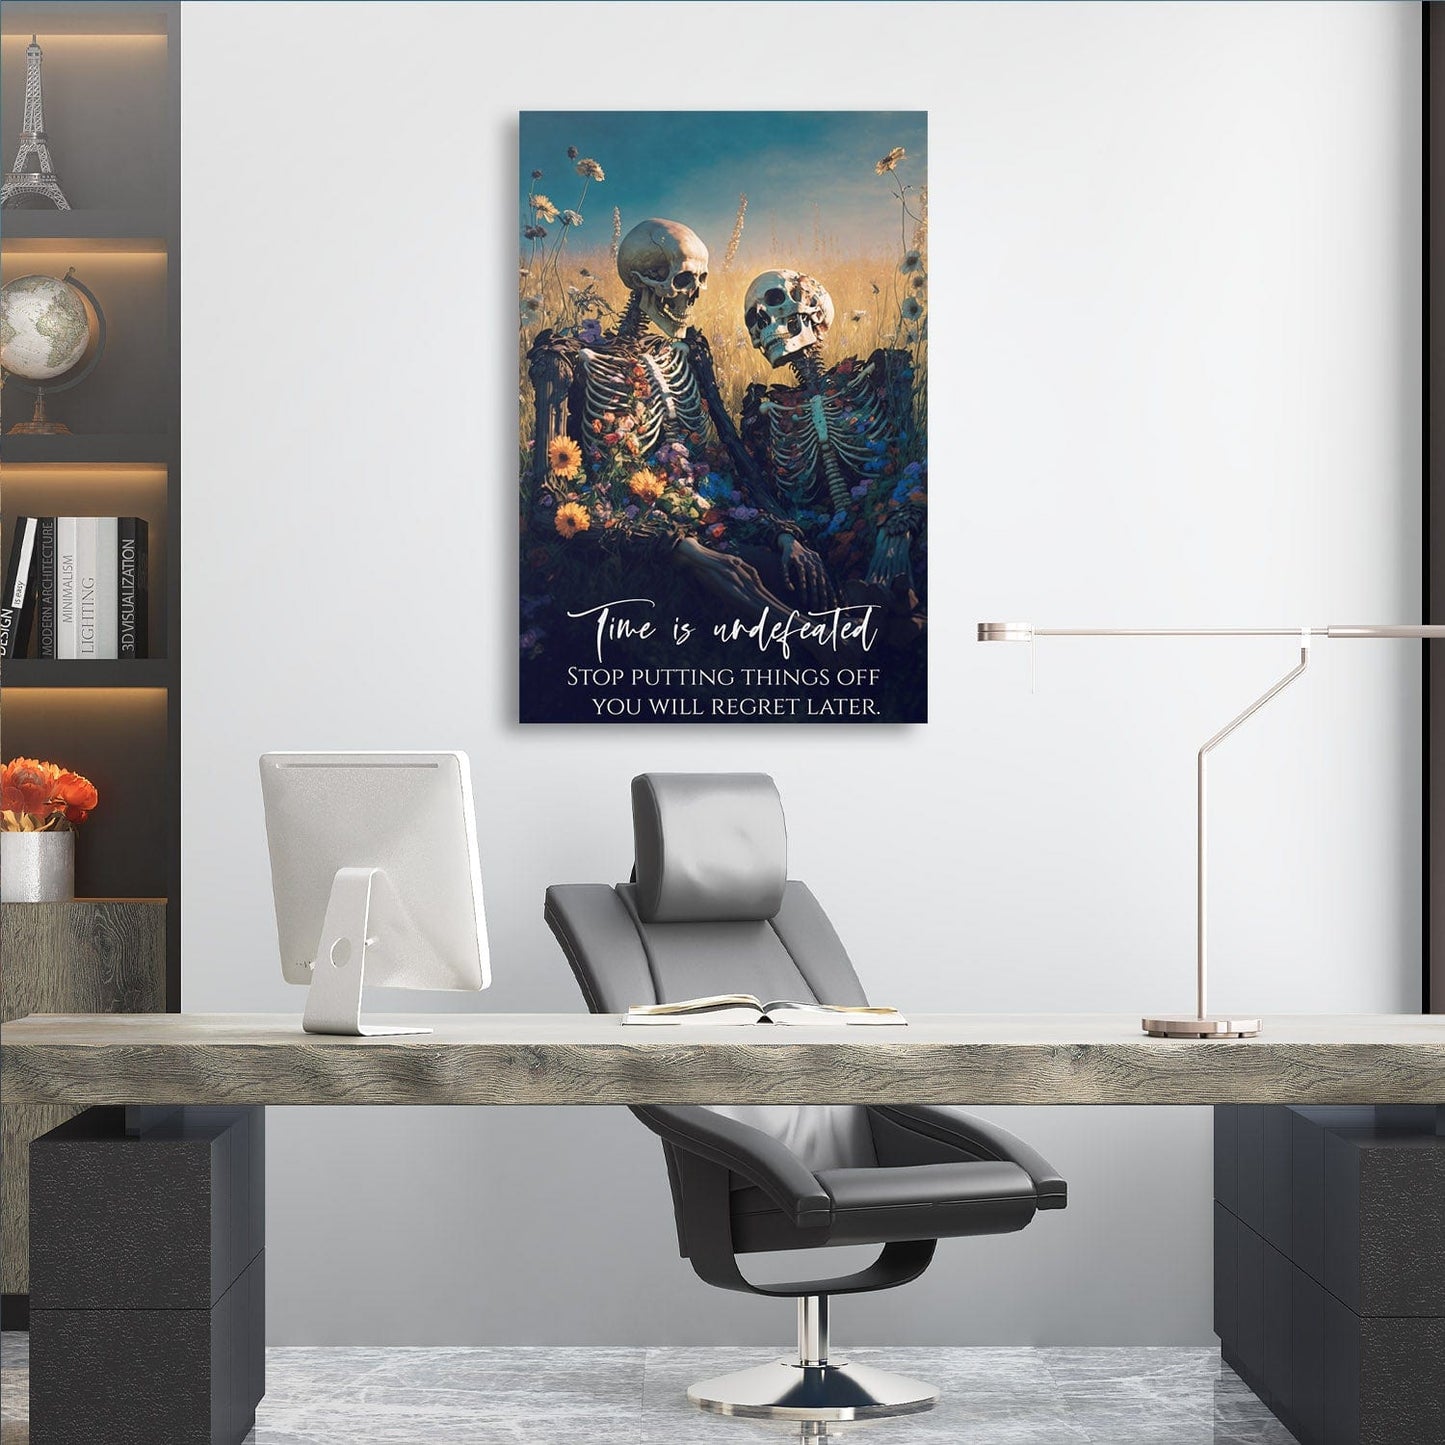 Time is undefeated Wall Art | Inspirational Wall Art Motivational Wall Art Quotes Office Art | ImpaktMaker Exclusive Canvas Art Portrait